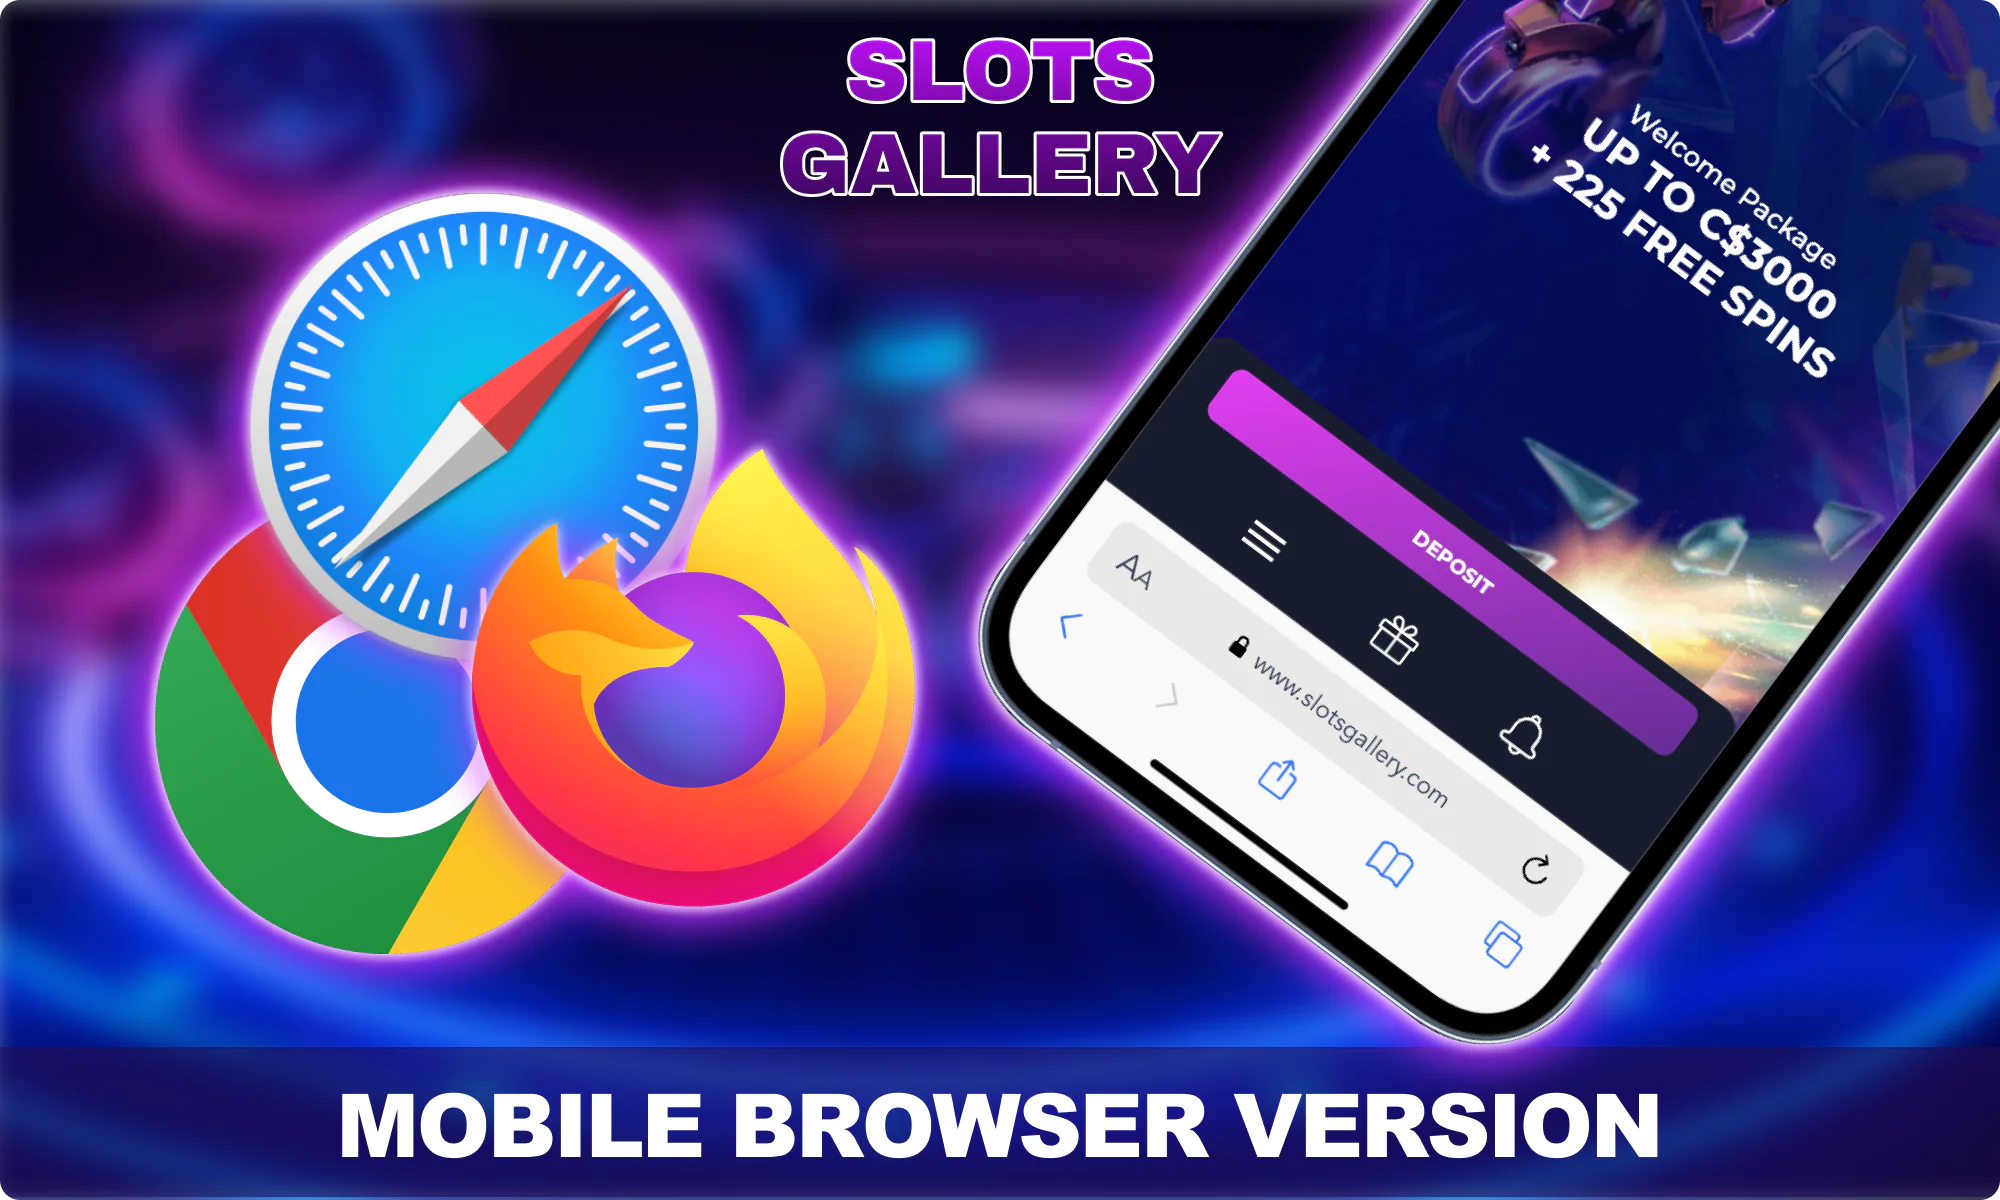 Play through mobile browser at Slots Gallery Australia